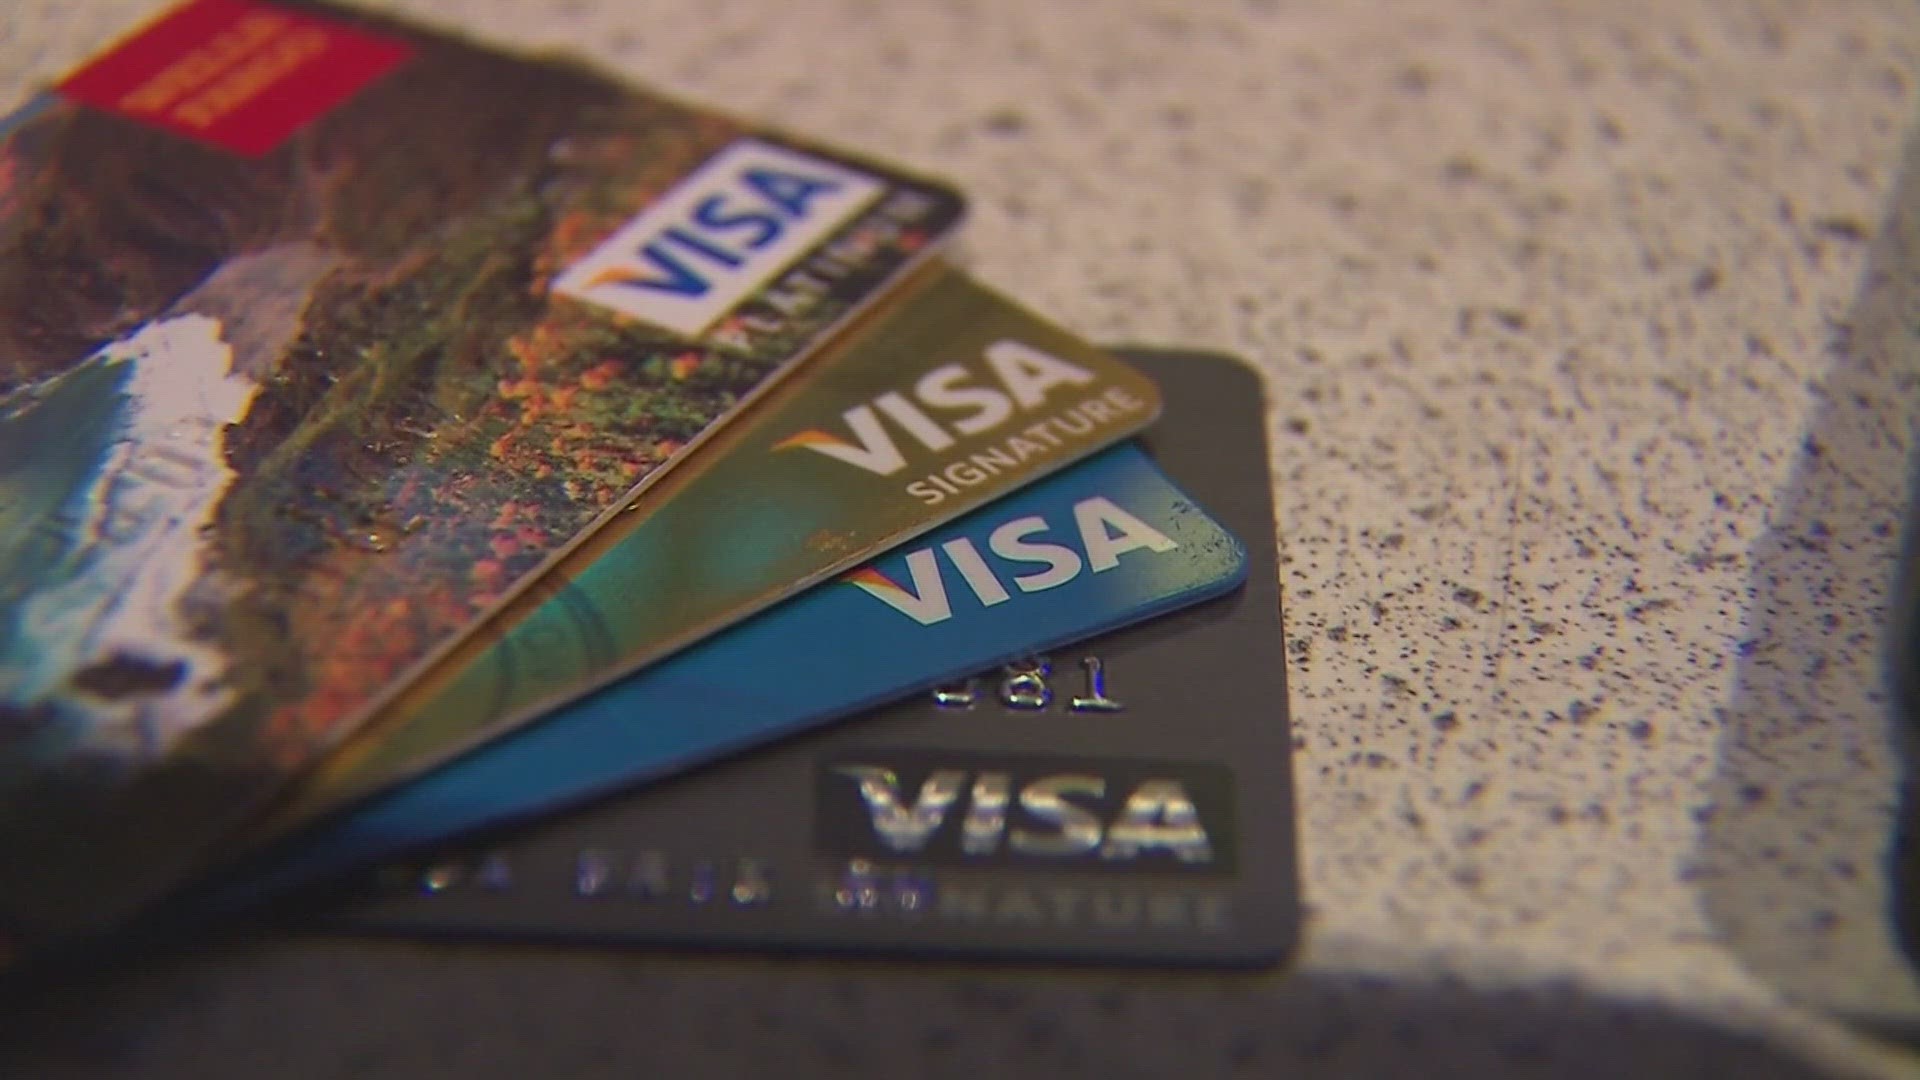 The new rule is expected to lower the typical credit card late fee...
from $32 to $8. It'll go into effect 60 days after they register the rule.